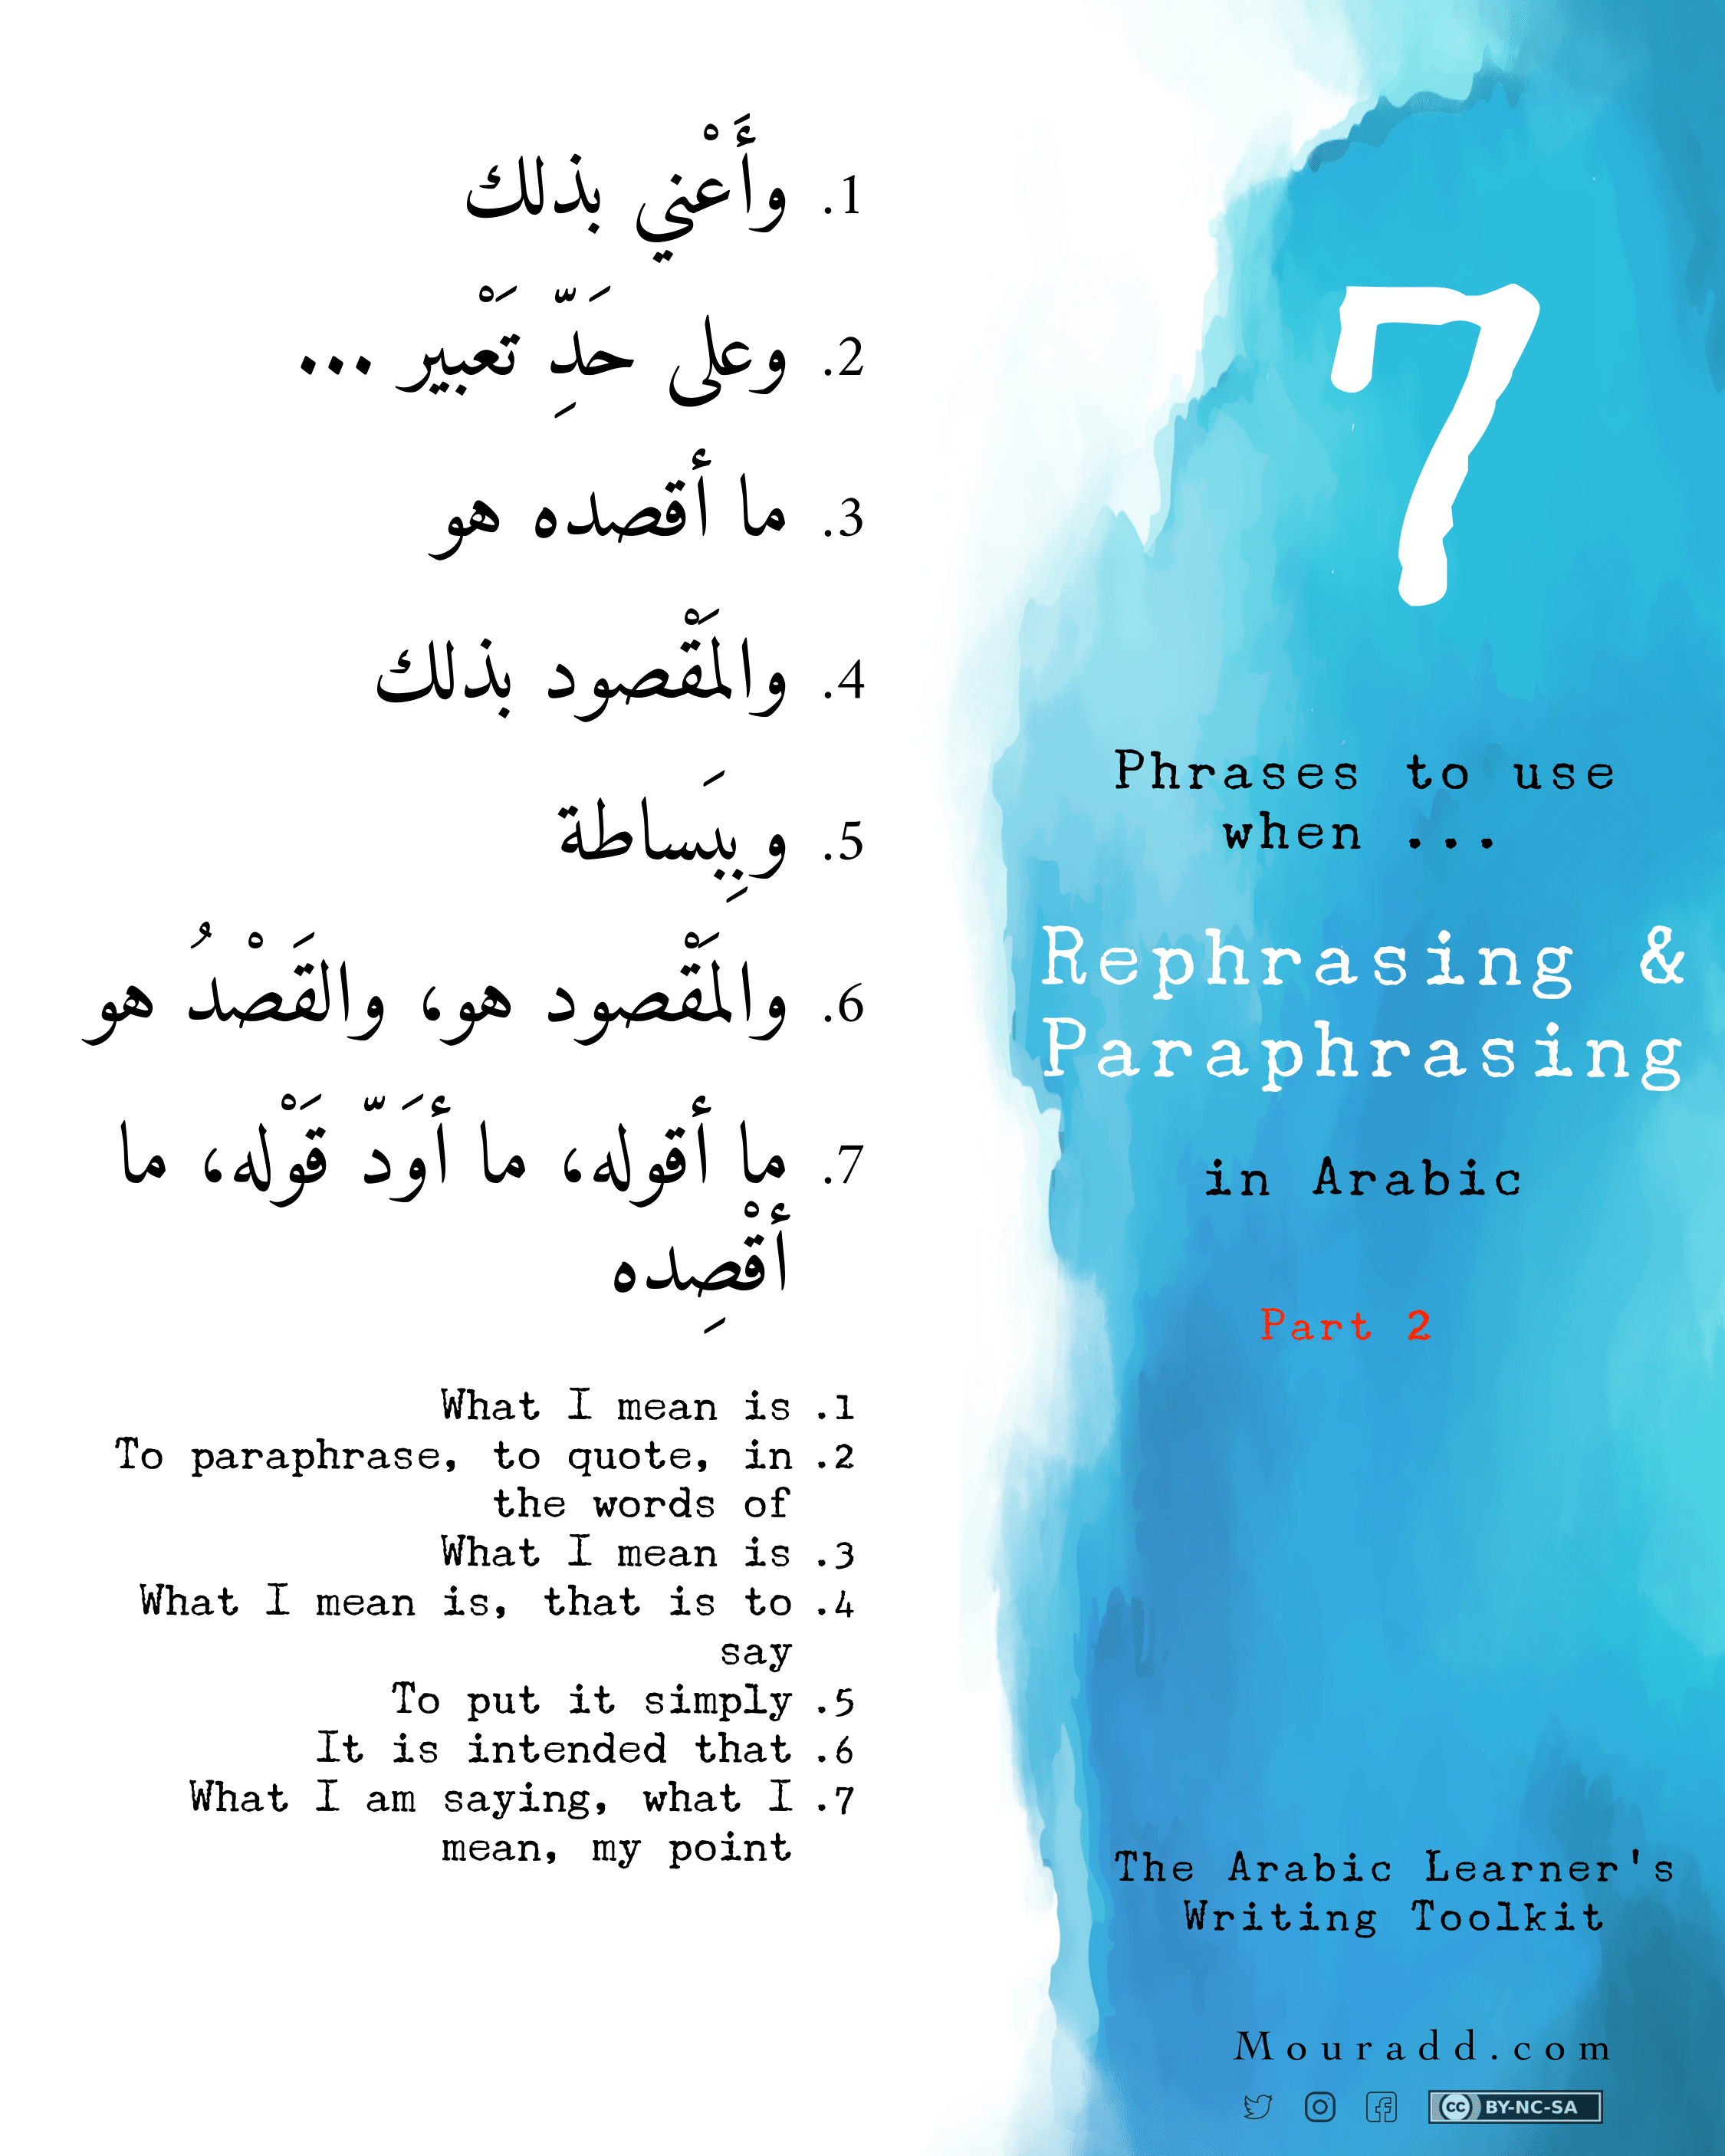 paraphrasing meaning in arabic